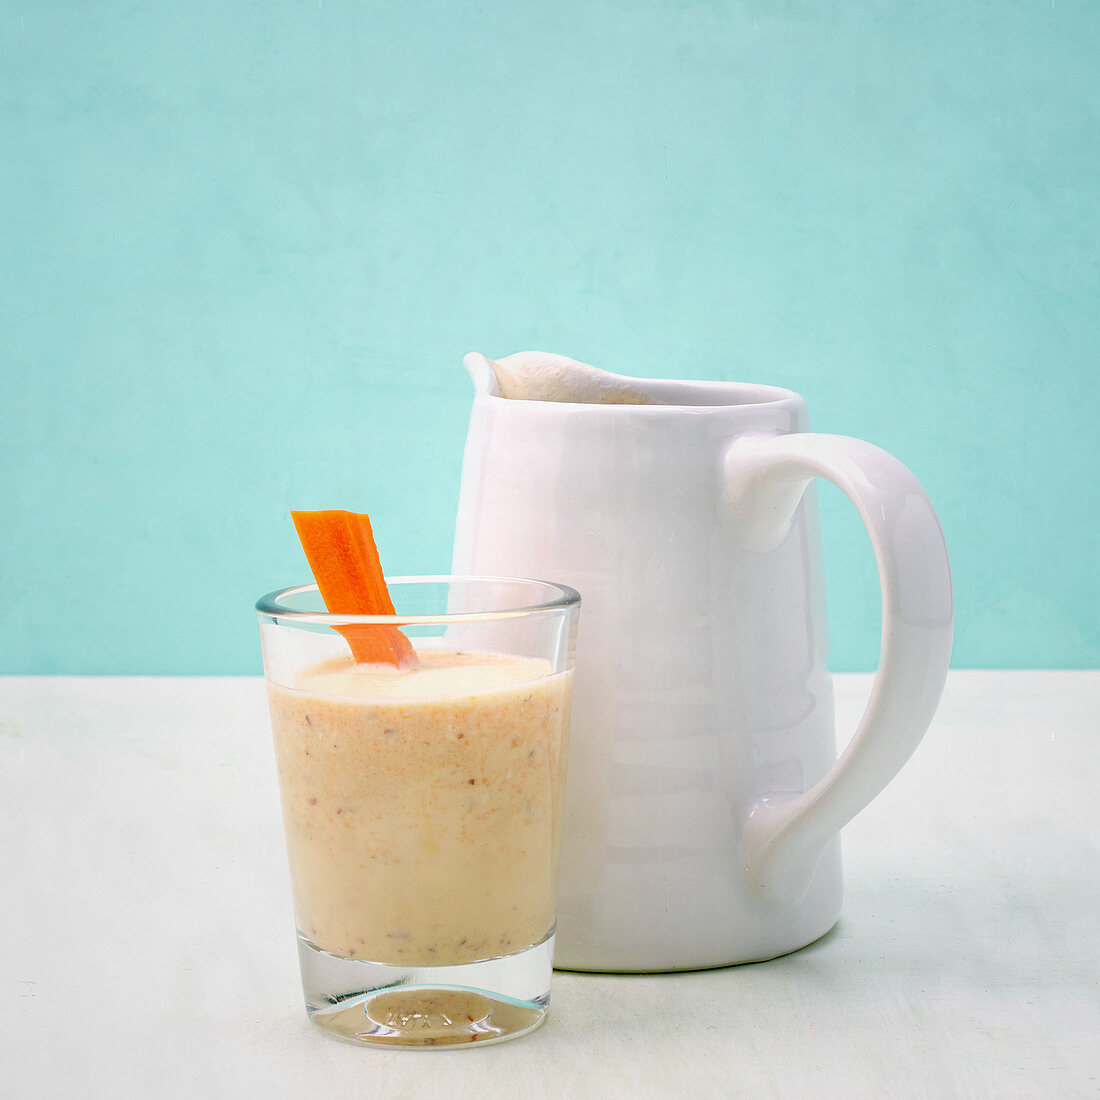 Hot carrot and date milk with oats